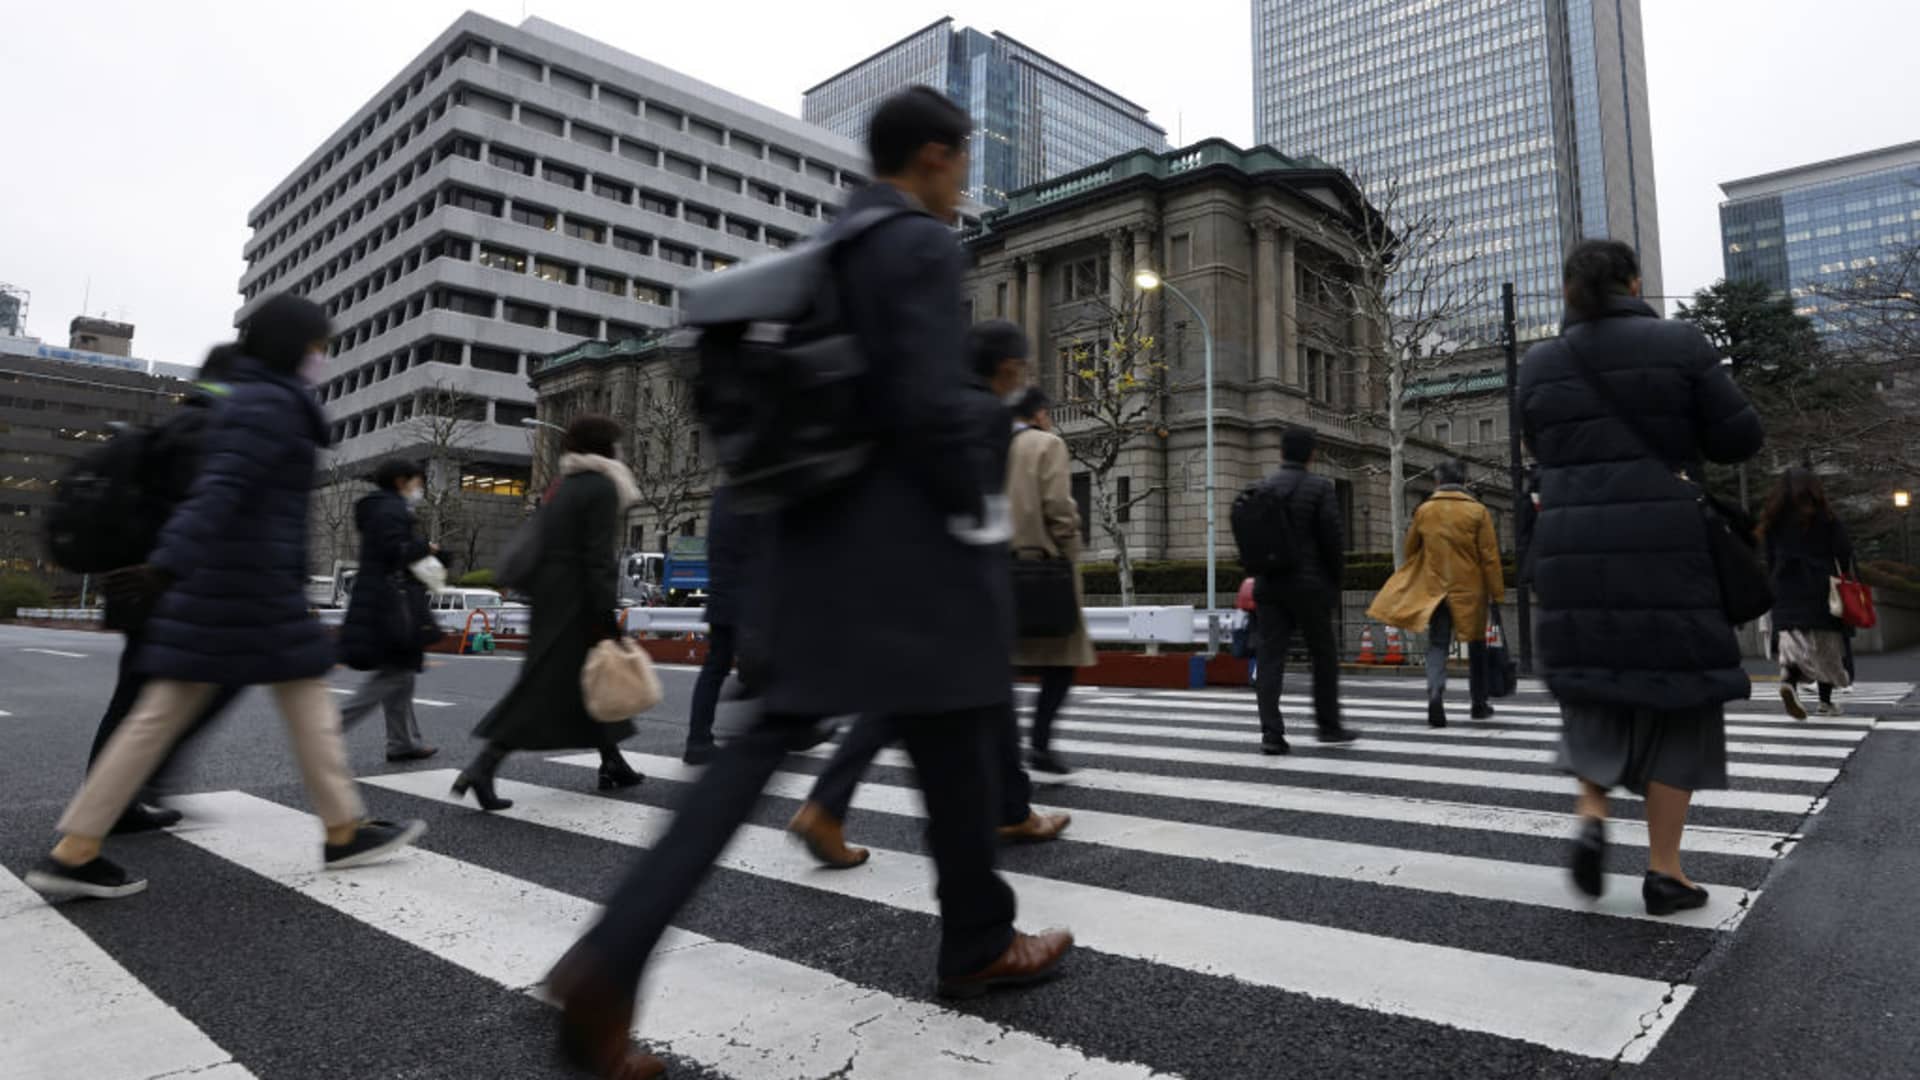 Bank of Japan defends yield curve control measures, intends to stick to ultra-easy monetary policy